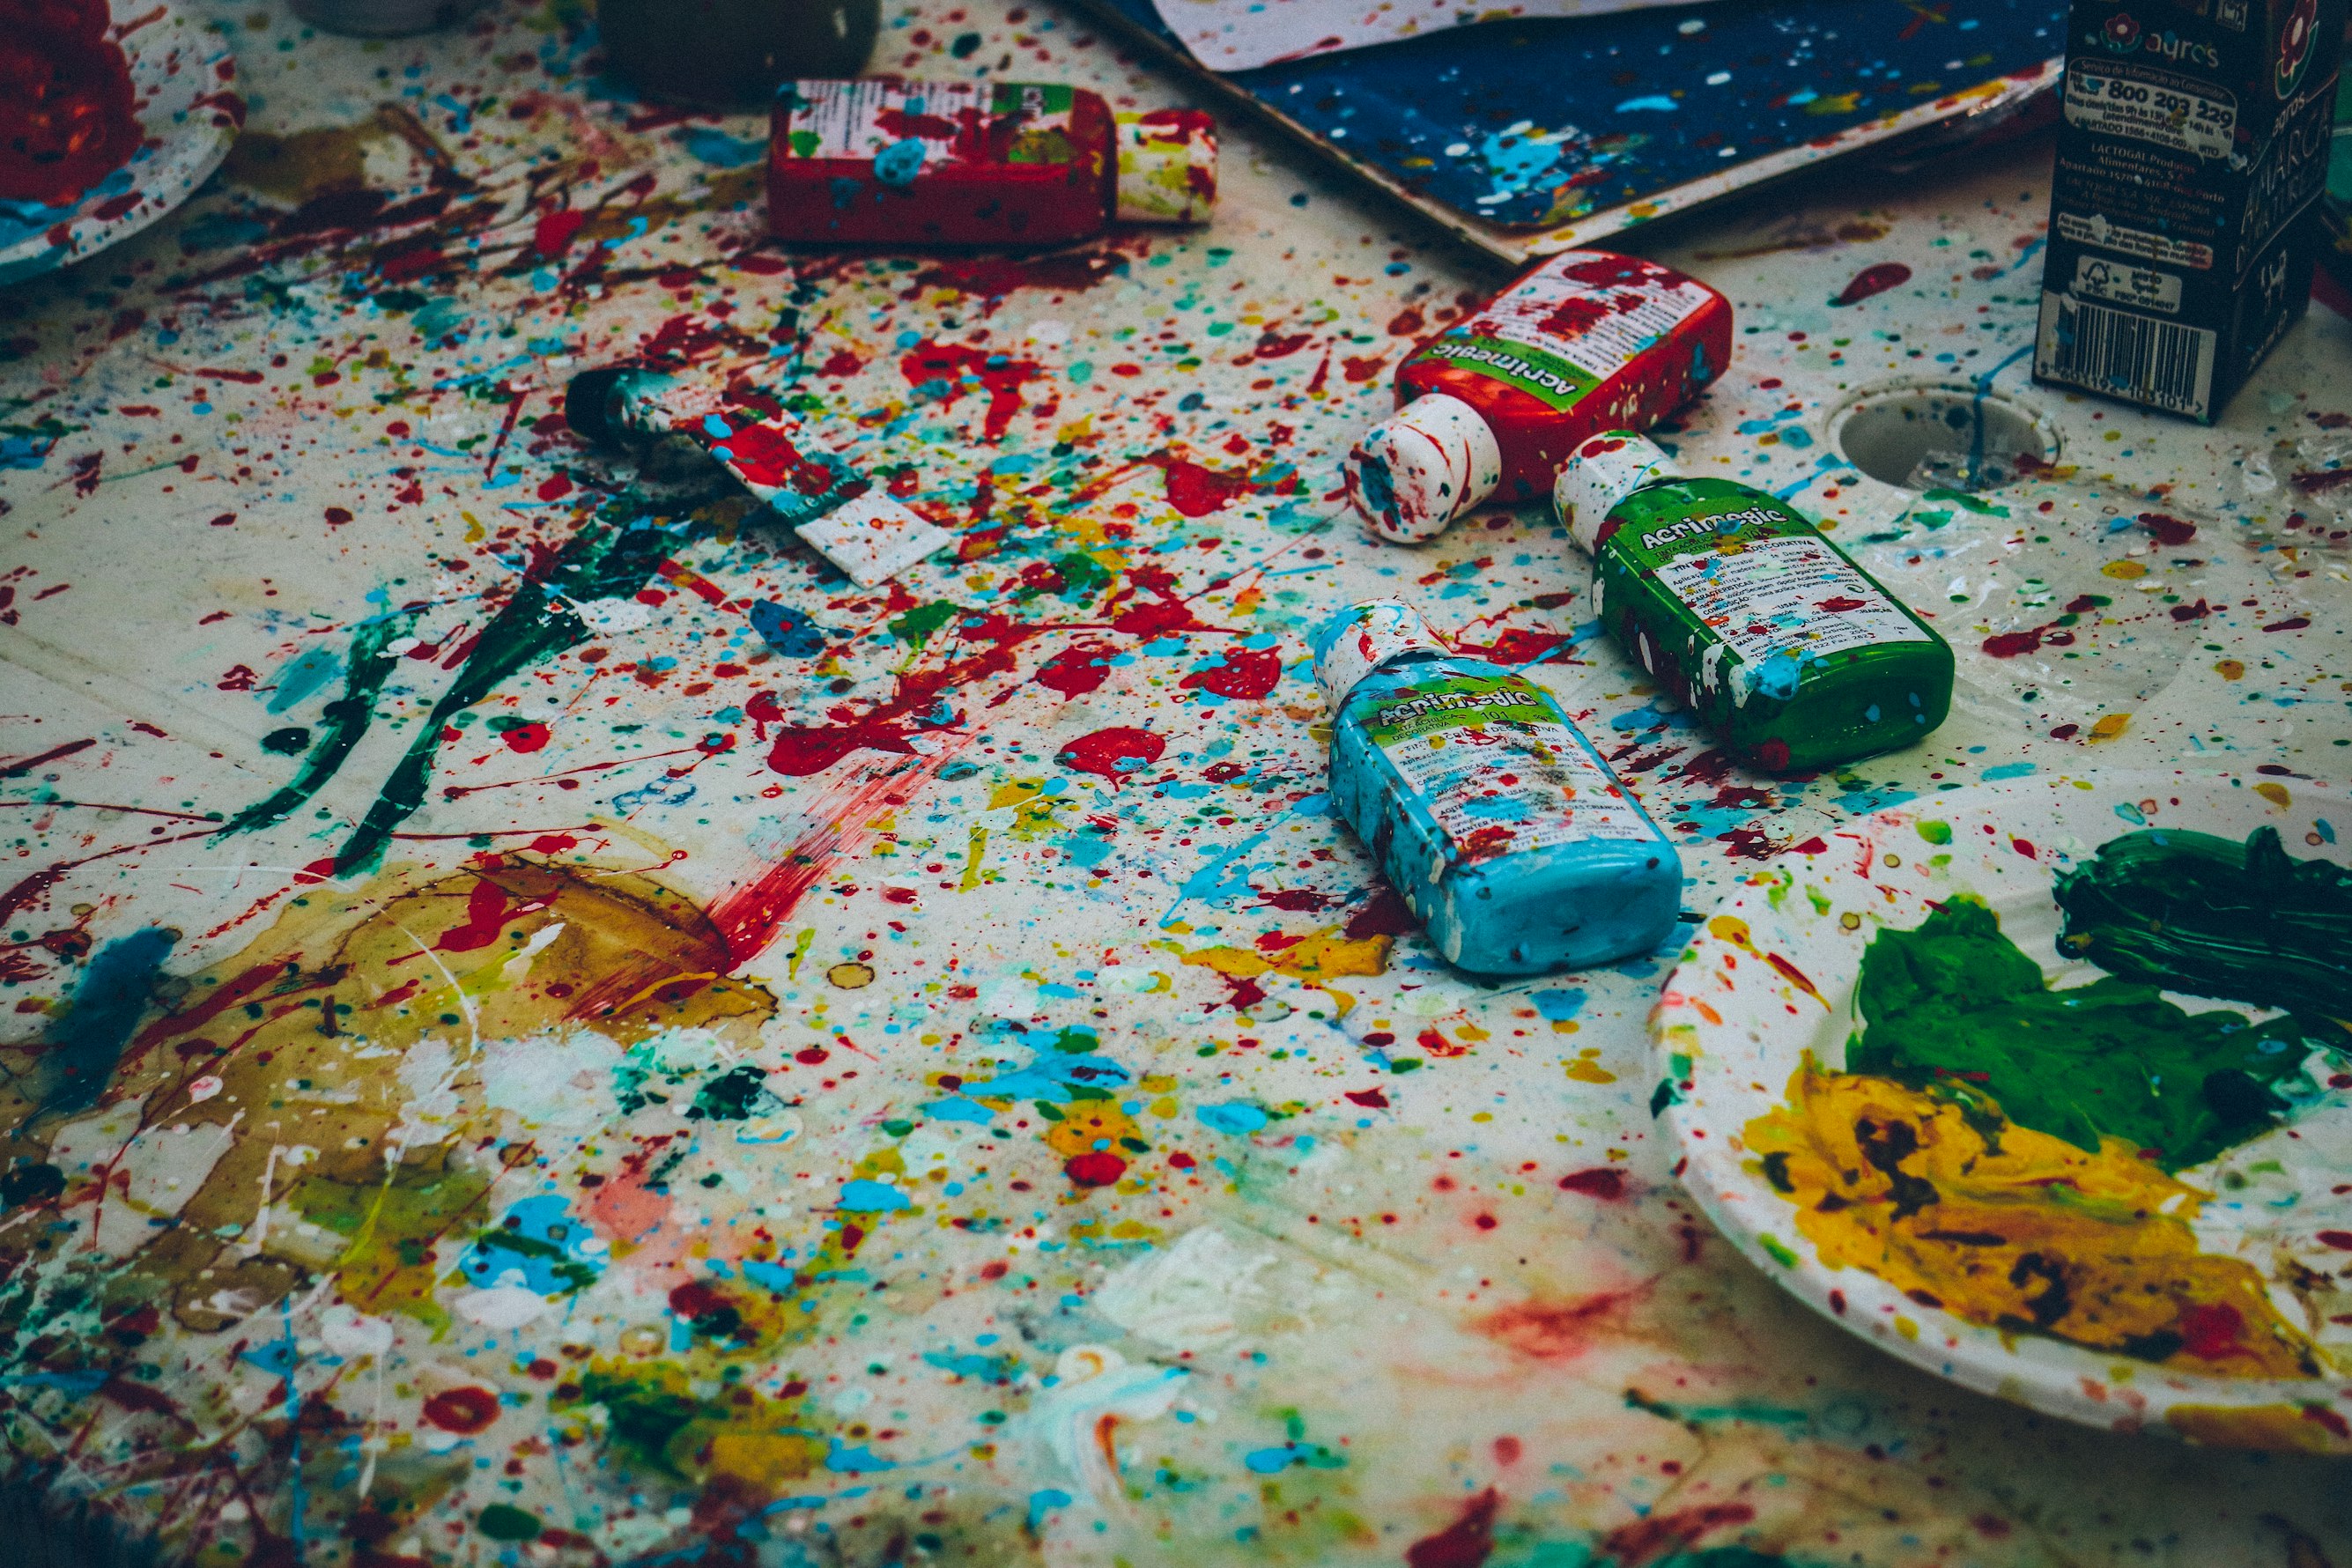 Assorted colored paint bottles on top of floor covered in splattered paint. Photo by Ricardo Viana